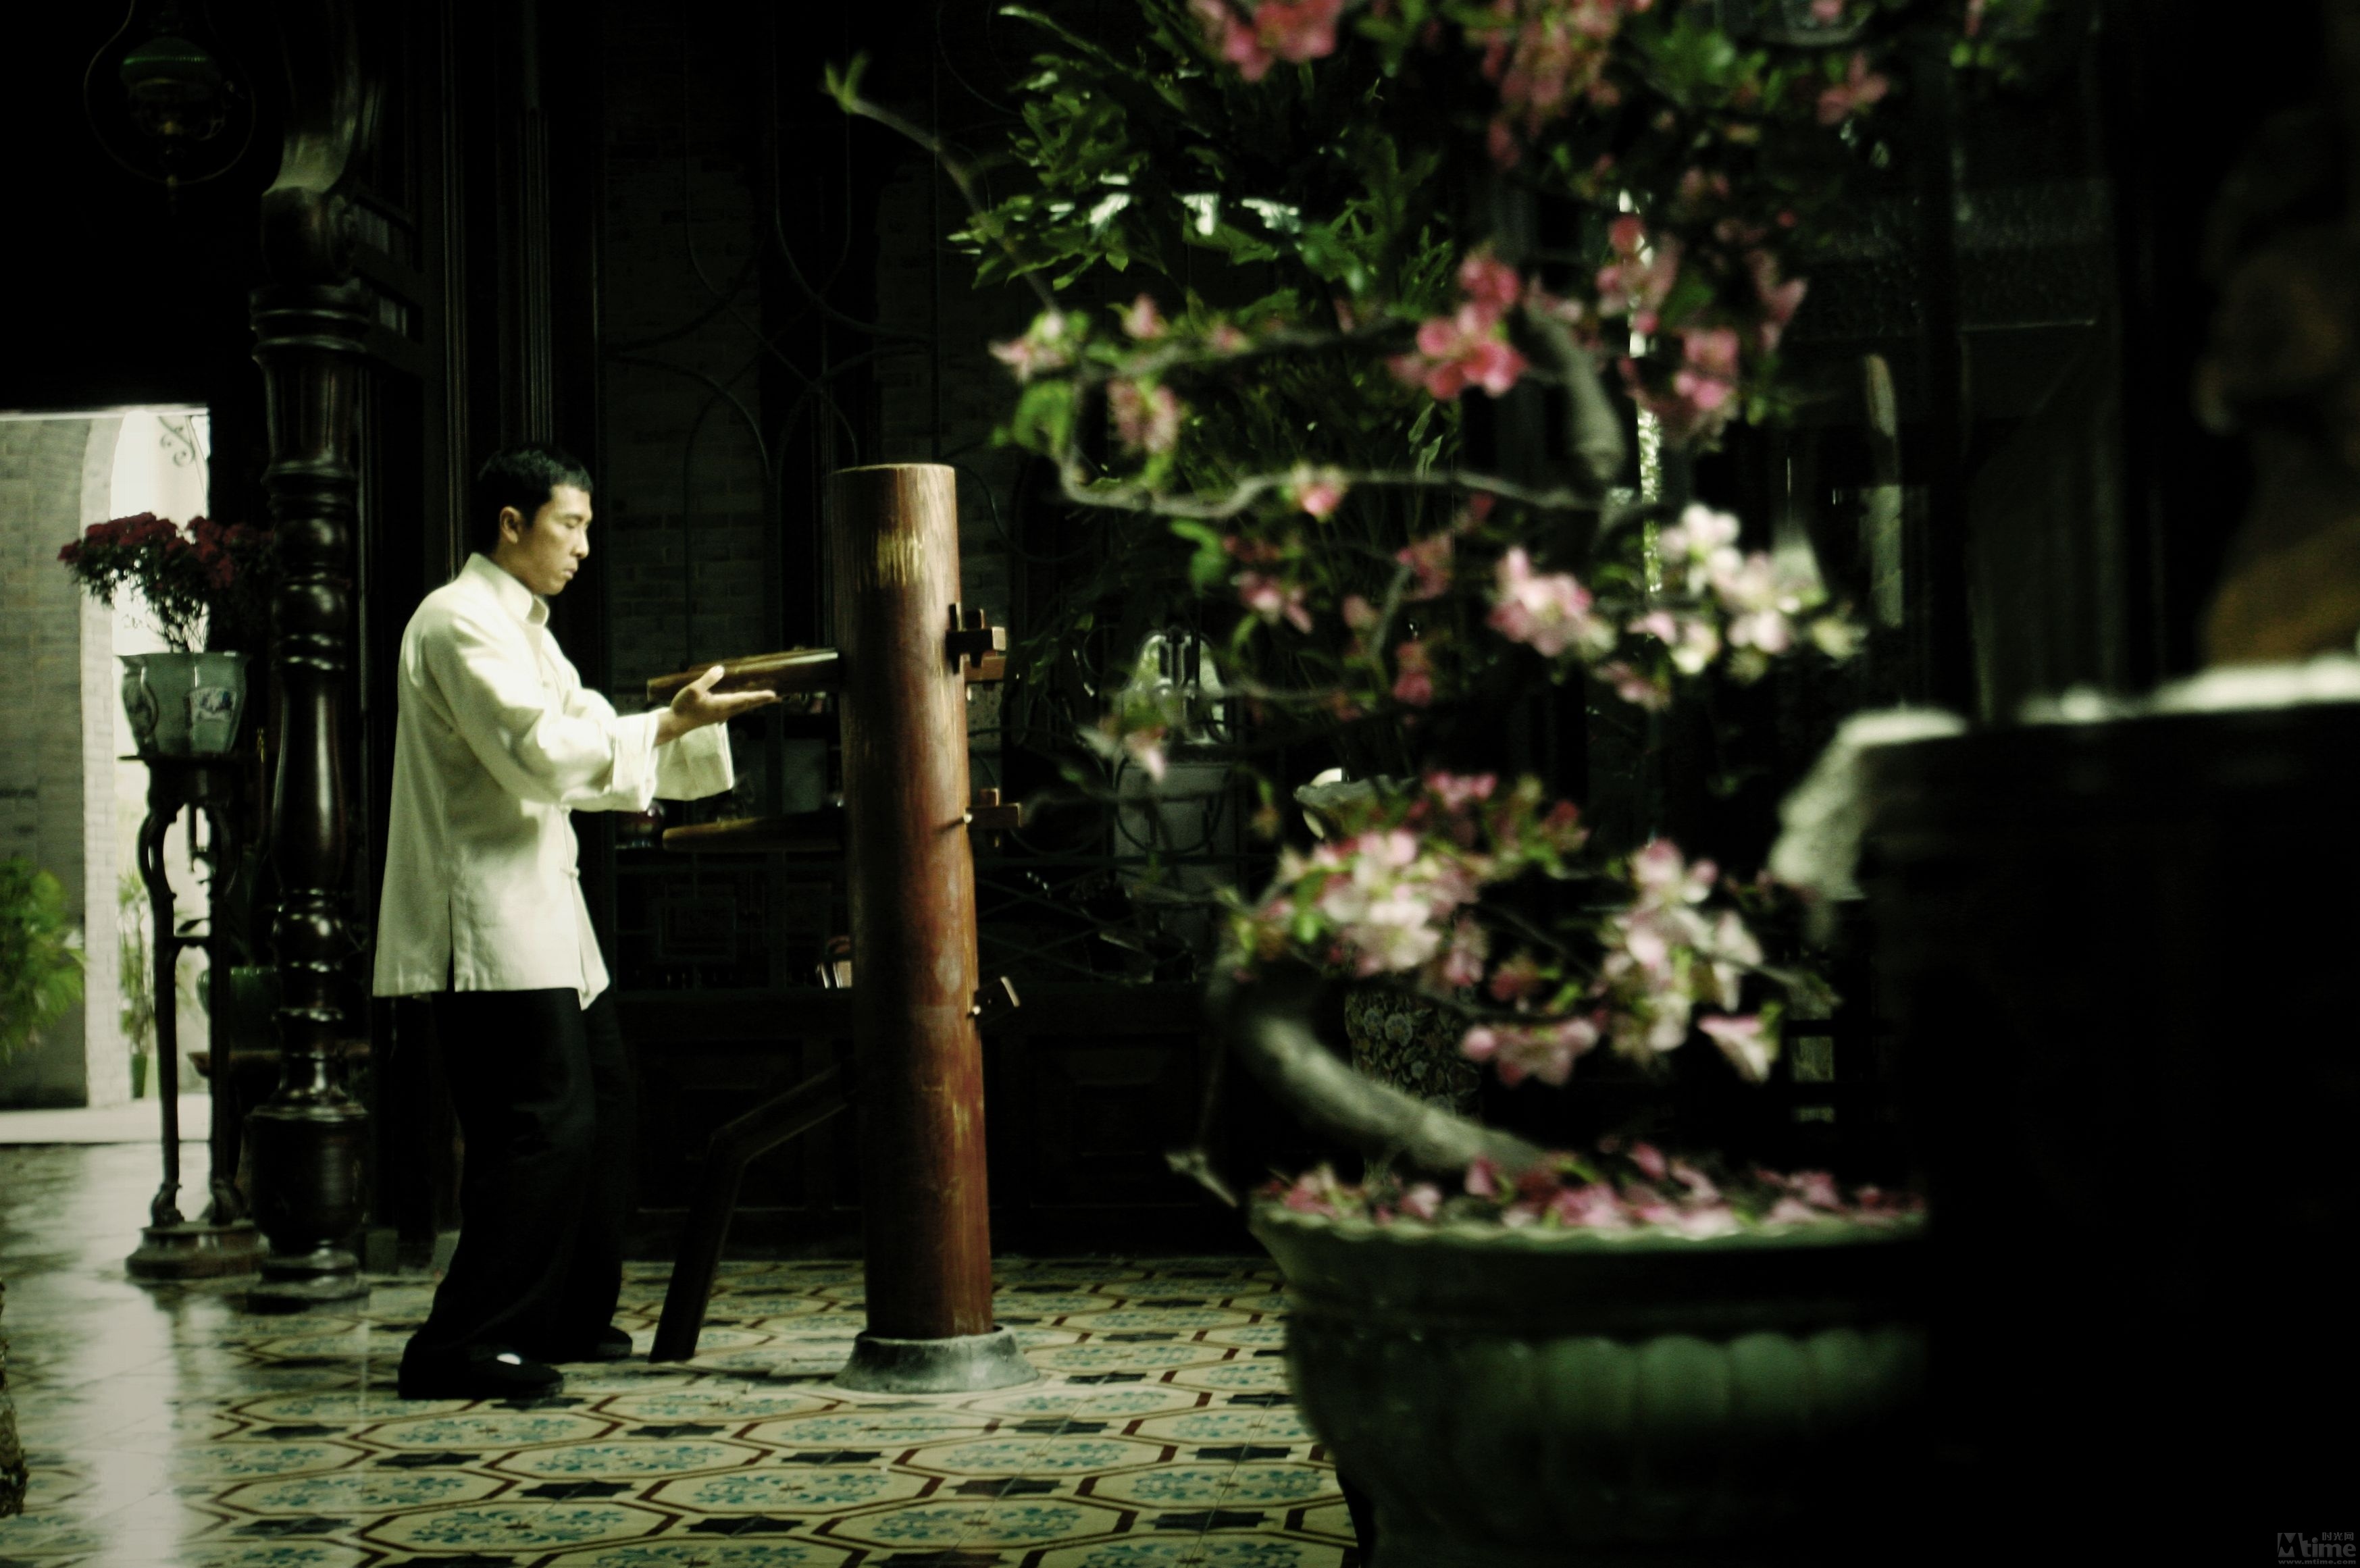 Ip man wallpaper 01 in wallpapers album photos and posters in